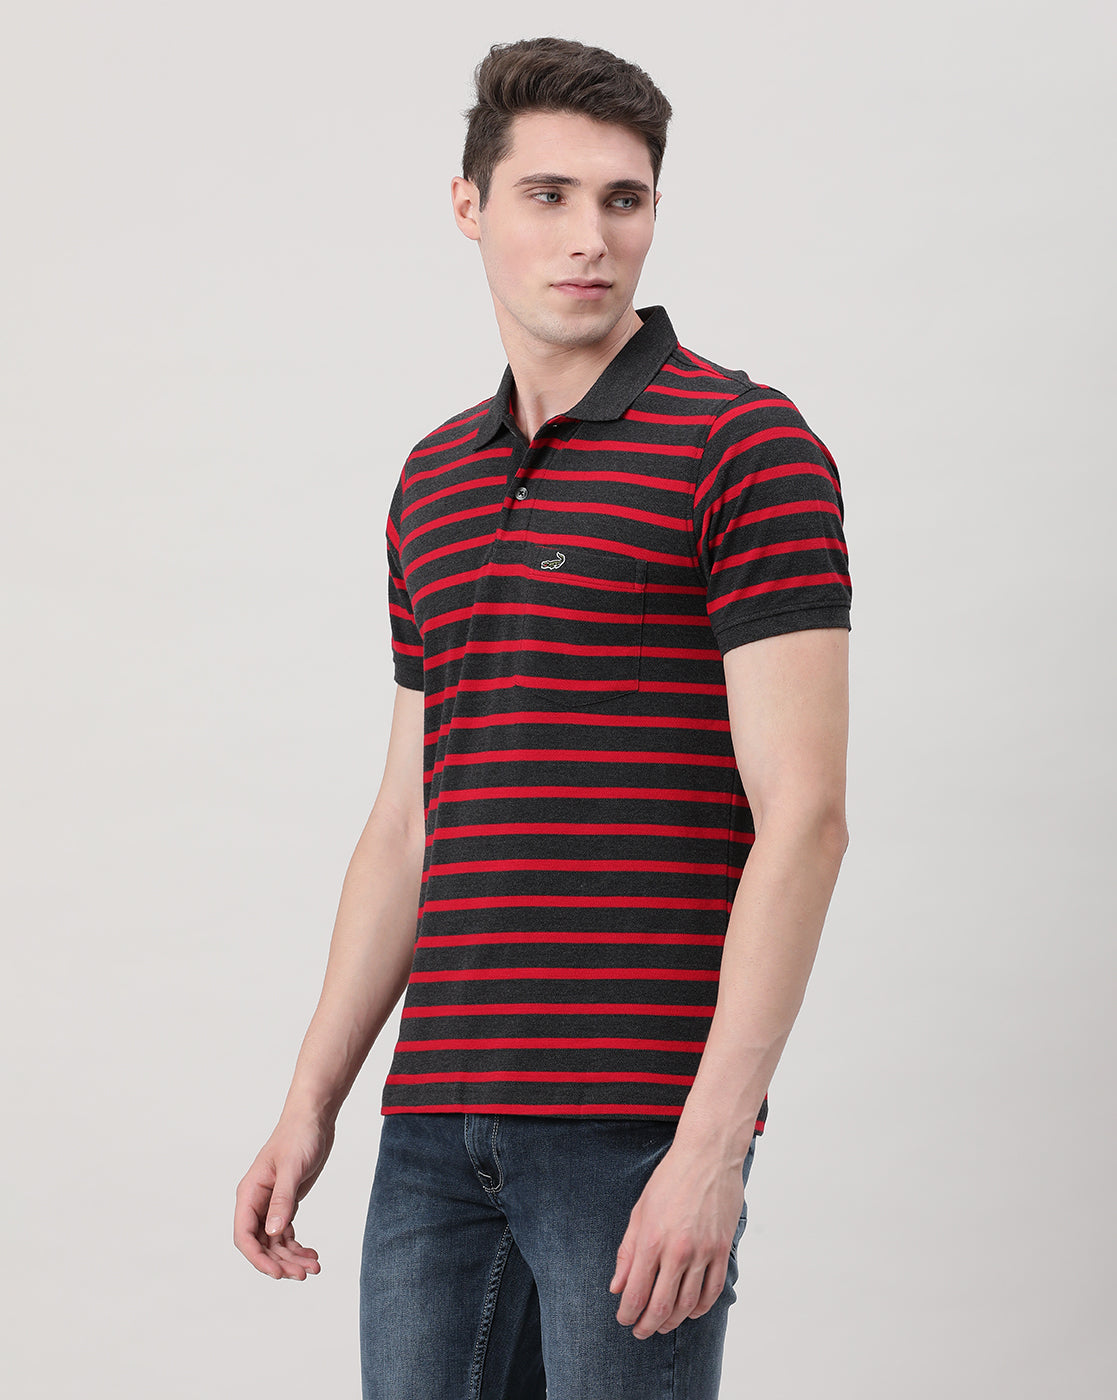 Casual Red T-Shirt Striper Half Sleeve Slim Fit with Collar